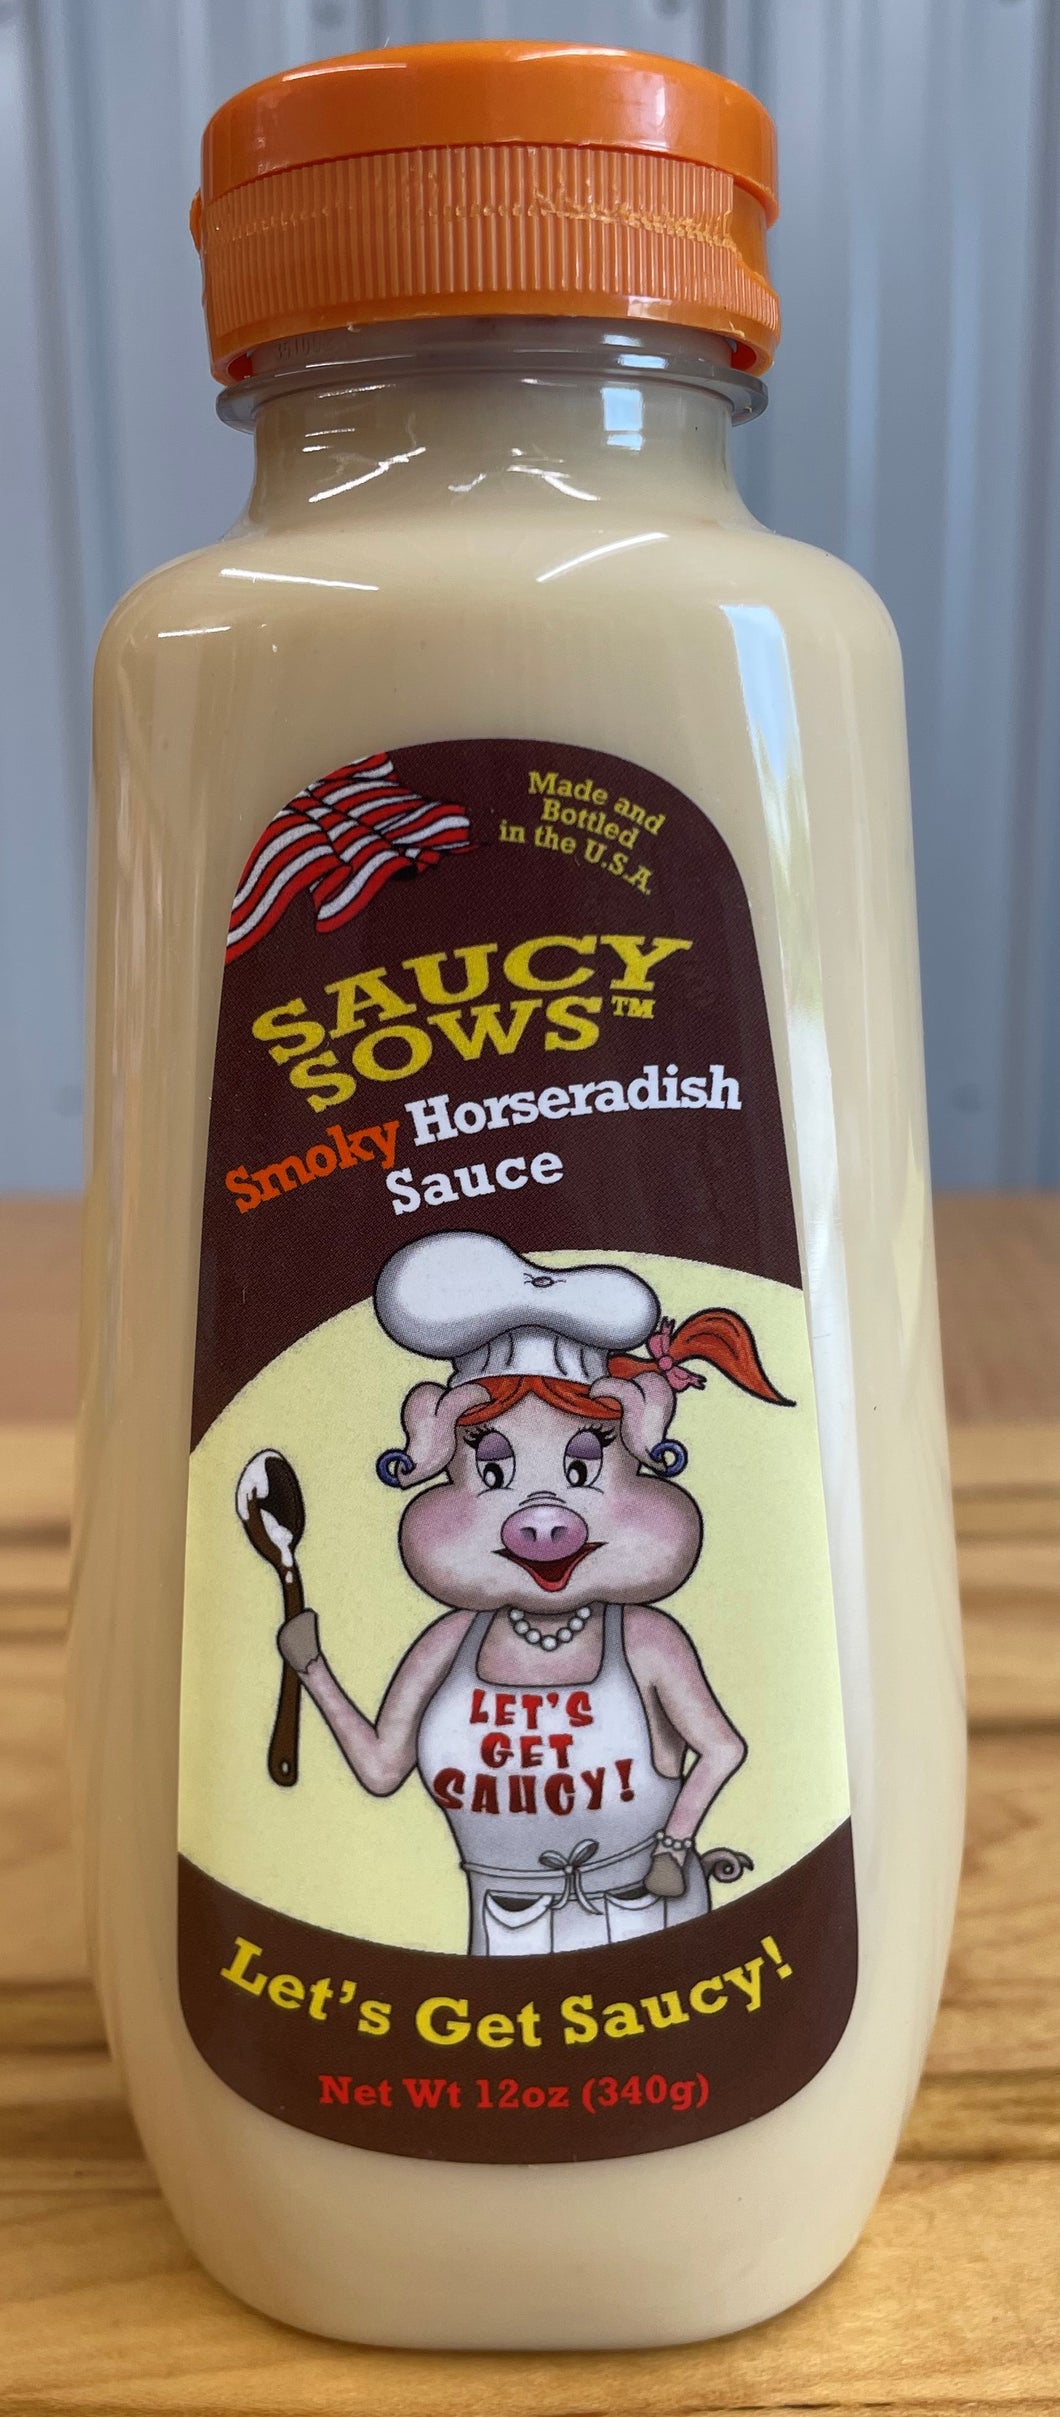 saucy sows